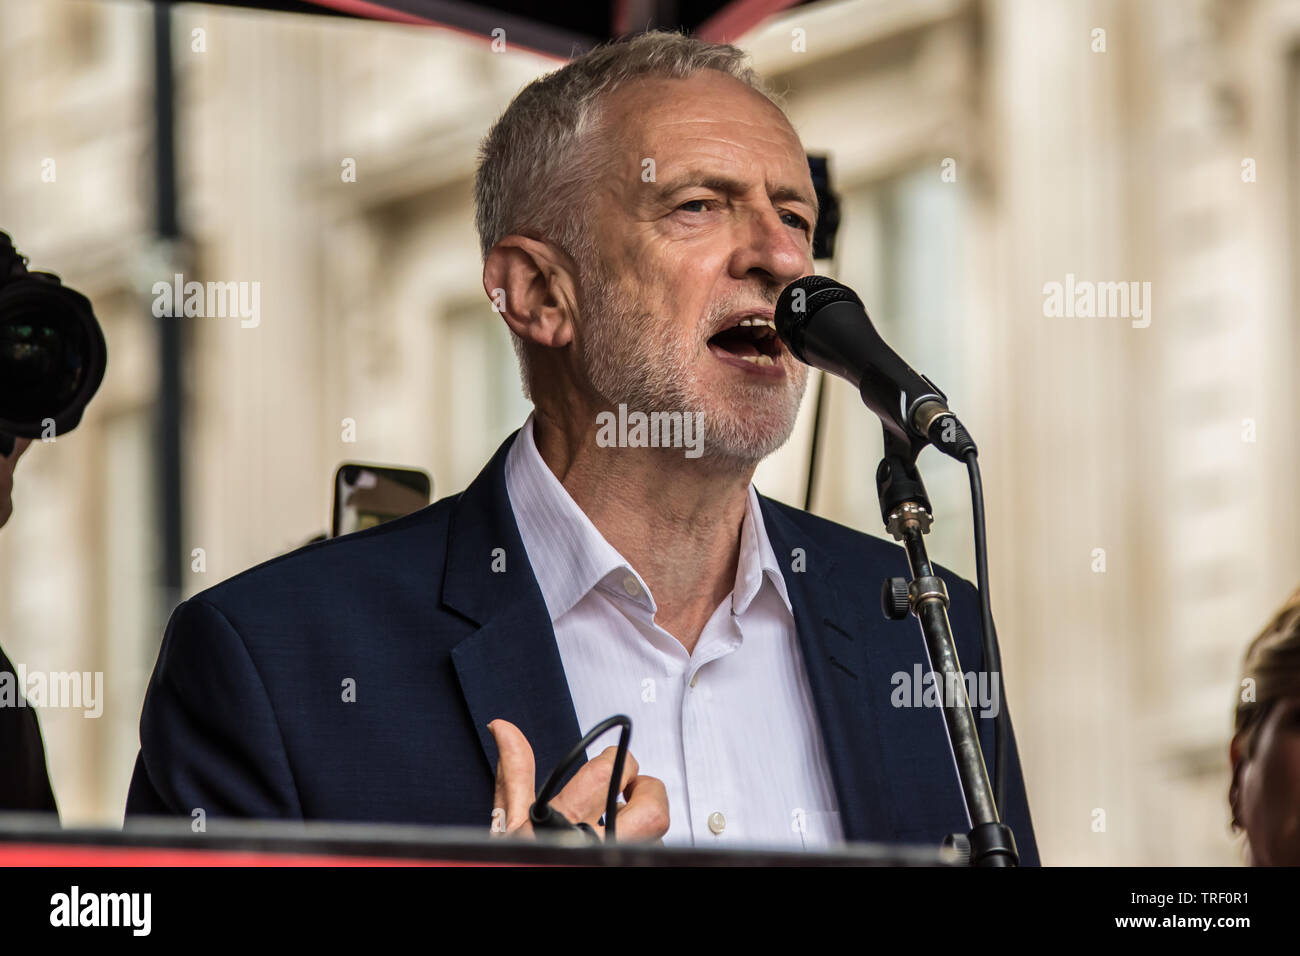 4 June ,2019.. London,UK.  Jeremy Corbyn, Leader of the Labour Party addresses the crowd on Whitehall. Tens of Thousands protest in Central London in a National demonstration against US President Donald Trumps State visit to the UK. Protesters rallied in Trafalgar Square before marching down Whitehall to Downing Street, where Trump was meeting UK Prime Minister Theresa May. David Rowe/Alamy Live News. Stock Photo